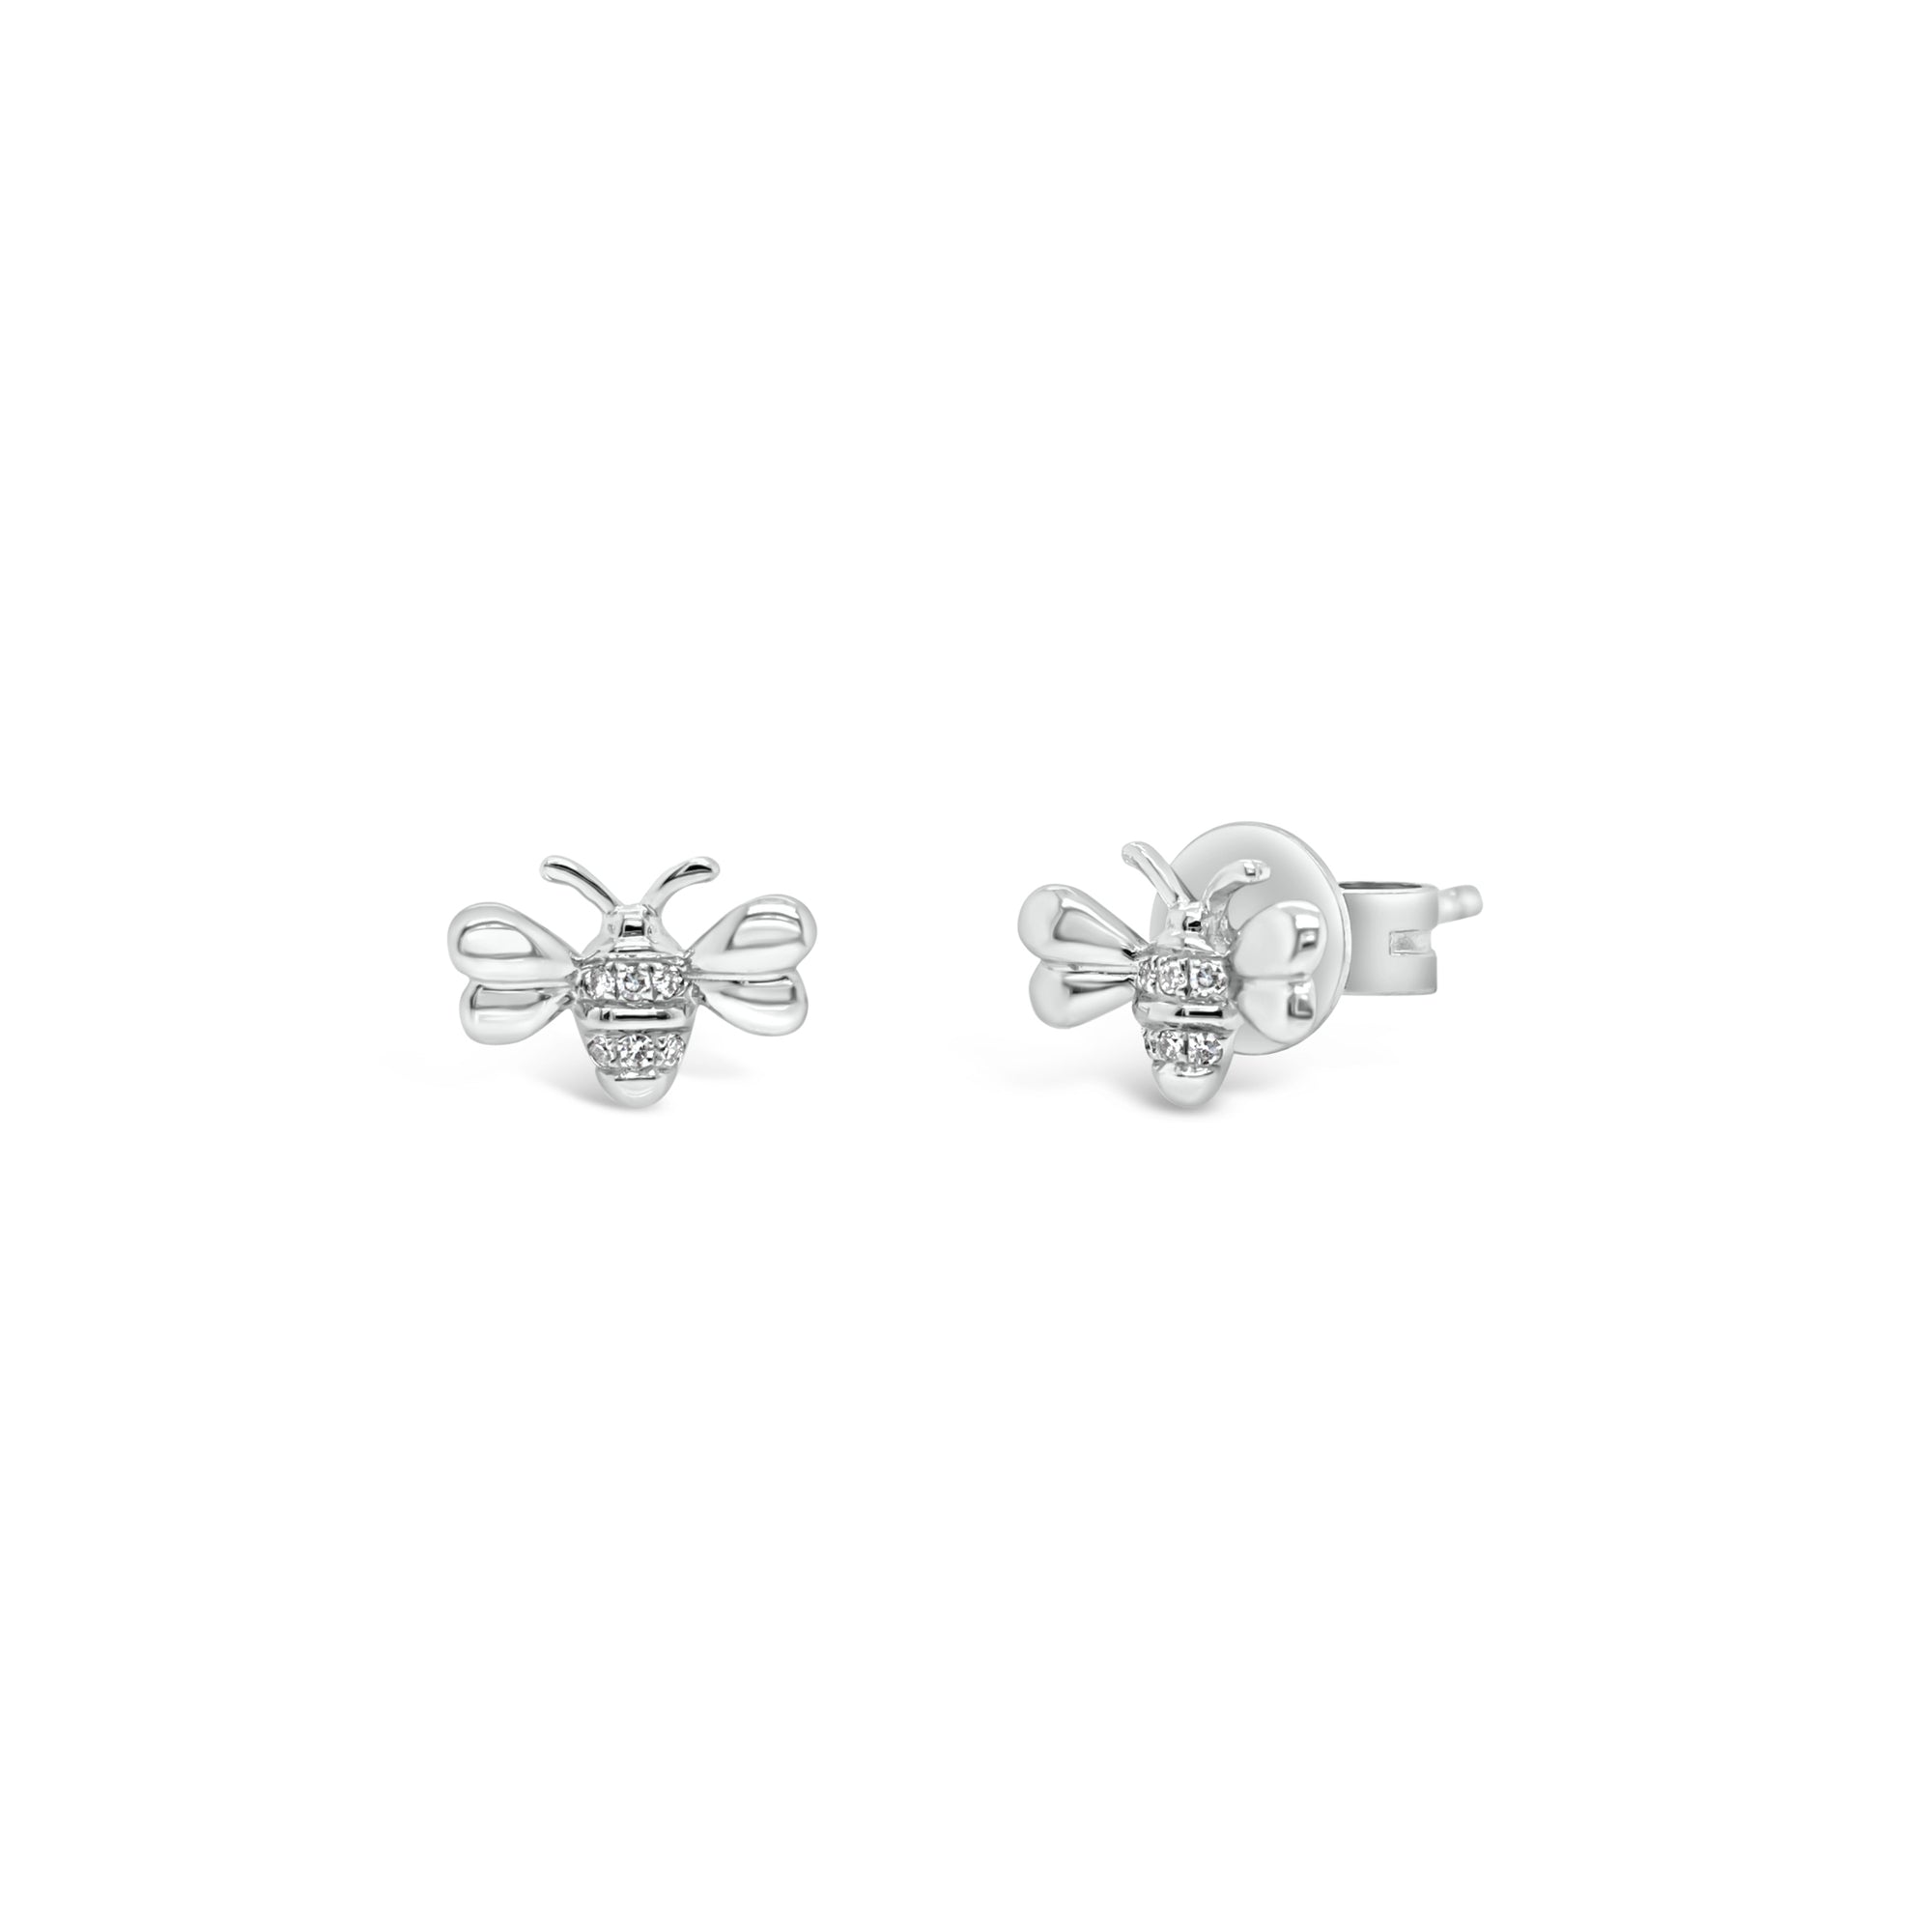 Diamond Bee Stud Earrings - 14K white gold weighing 1.03 grams - 12 round diamonds totaling 0.02 carats.